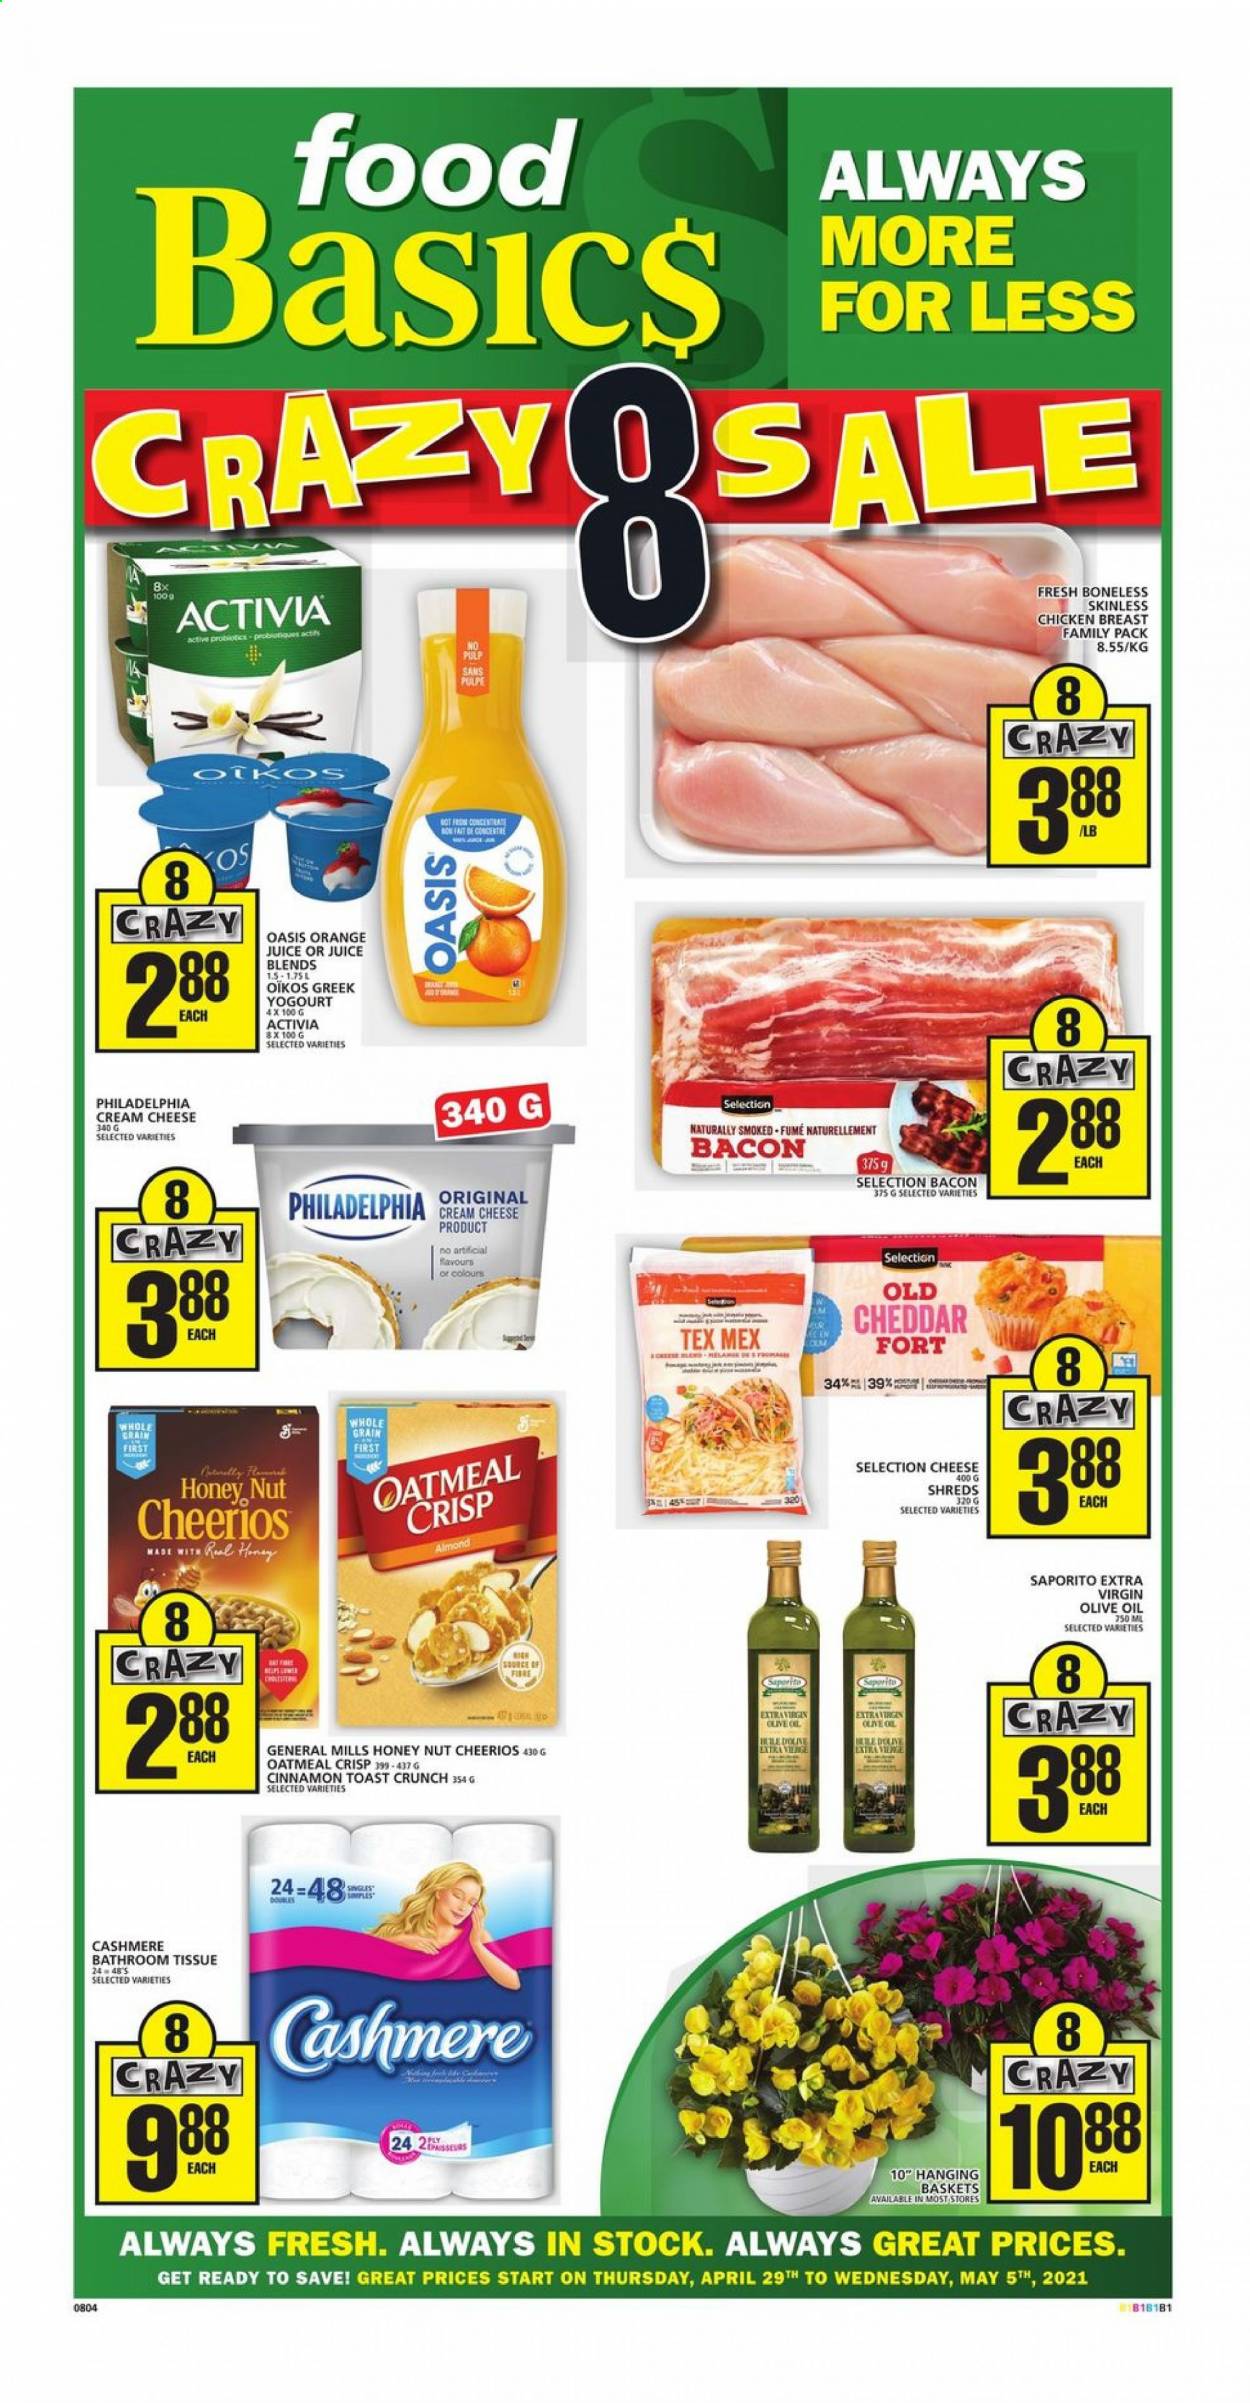 thumbnail - Food Basics Flyer - April 29, 2021 - May 05, 2021 - Sales products - bacon, cream cheese, cheddar, cheese, Activia, Oikos, oatmeal, Cheerios, cinnamon, extra virgin olive oil, olive oil, oil, orange juice, juice, chicken breasts, chicken, bath tissue, probiotics. Page 1.